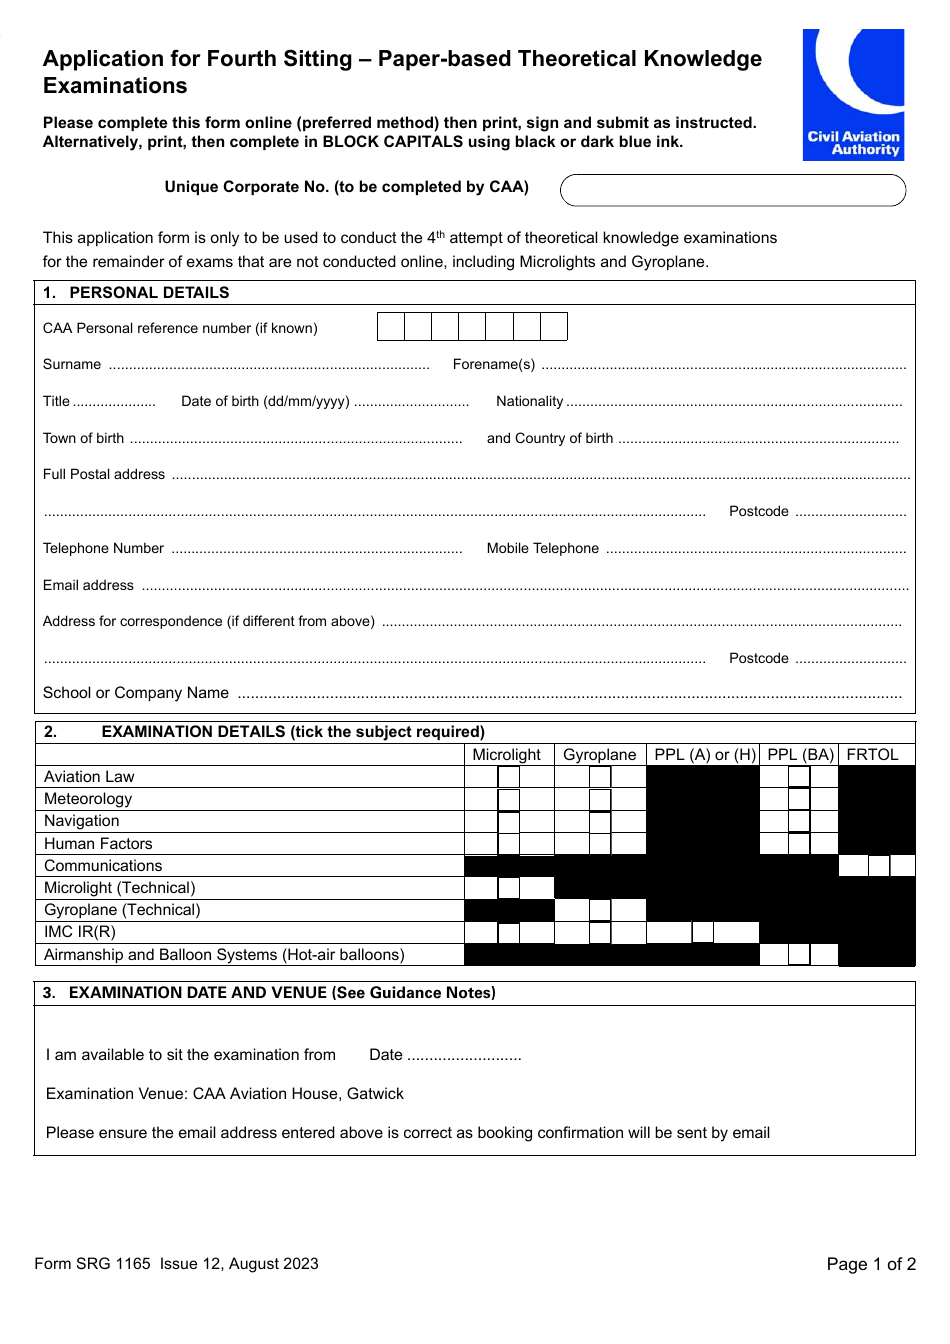 Form SRG1165 Application for Fourth Sitting - Paper-Based Theoretical Knowledge Examinations - United Kingdom, Page 1